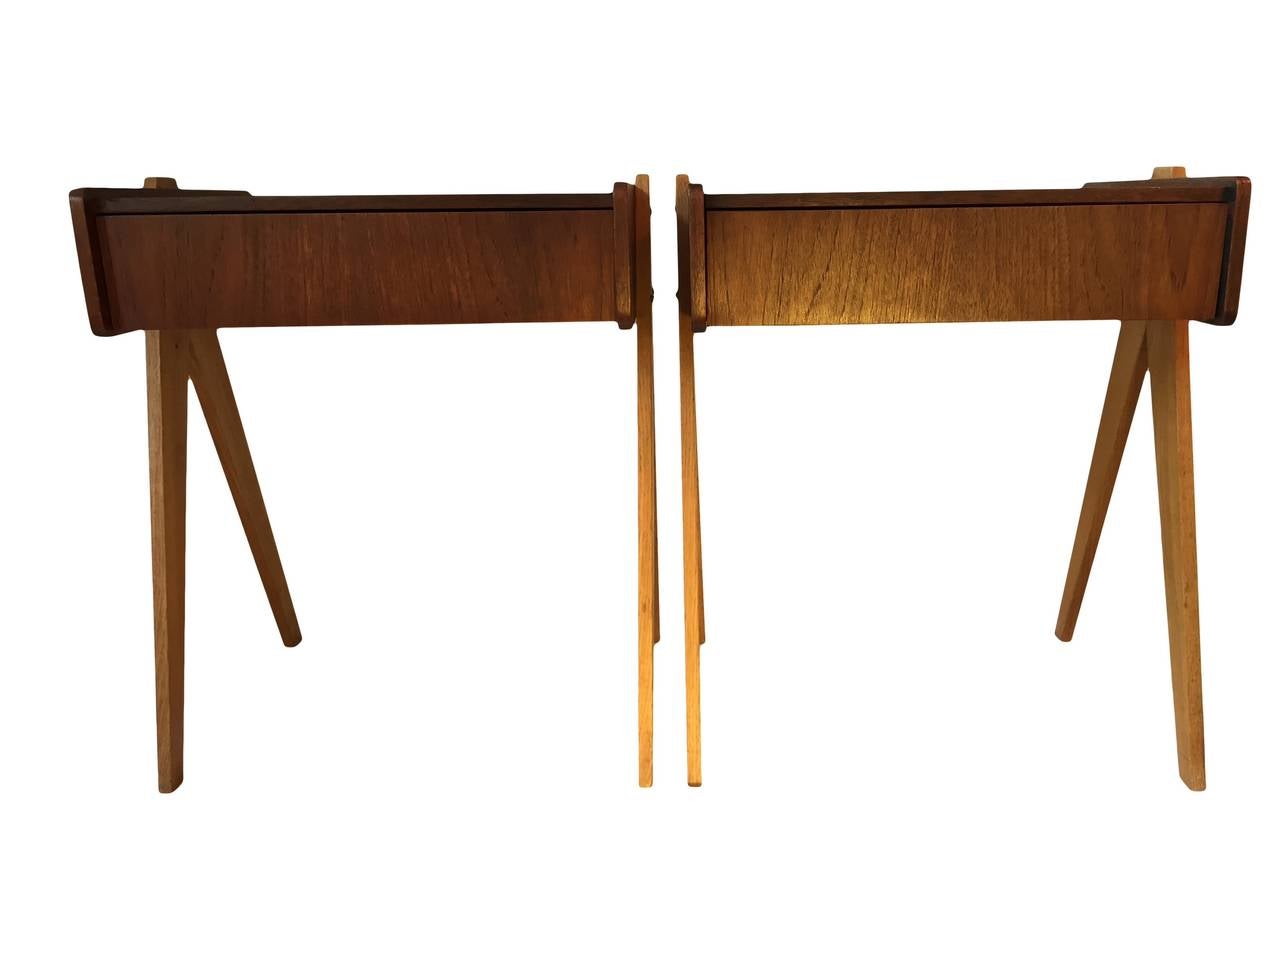 A totally unique pair of nightstands constructed in oak and teak with drawers. 
Made in Denmark, circa 1960.